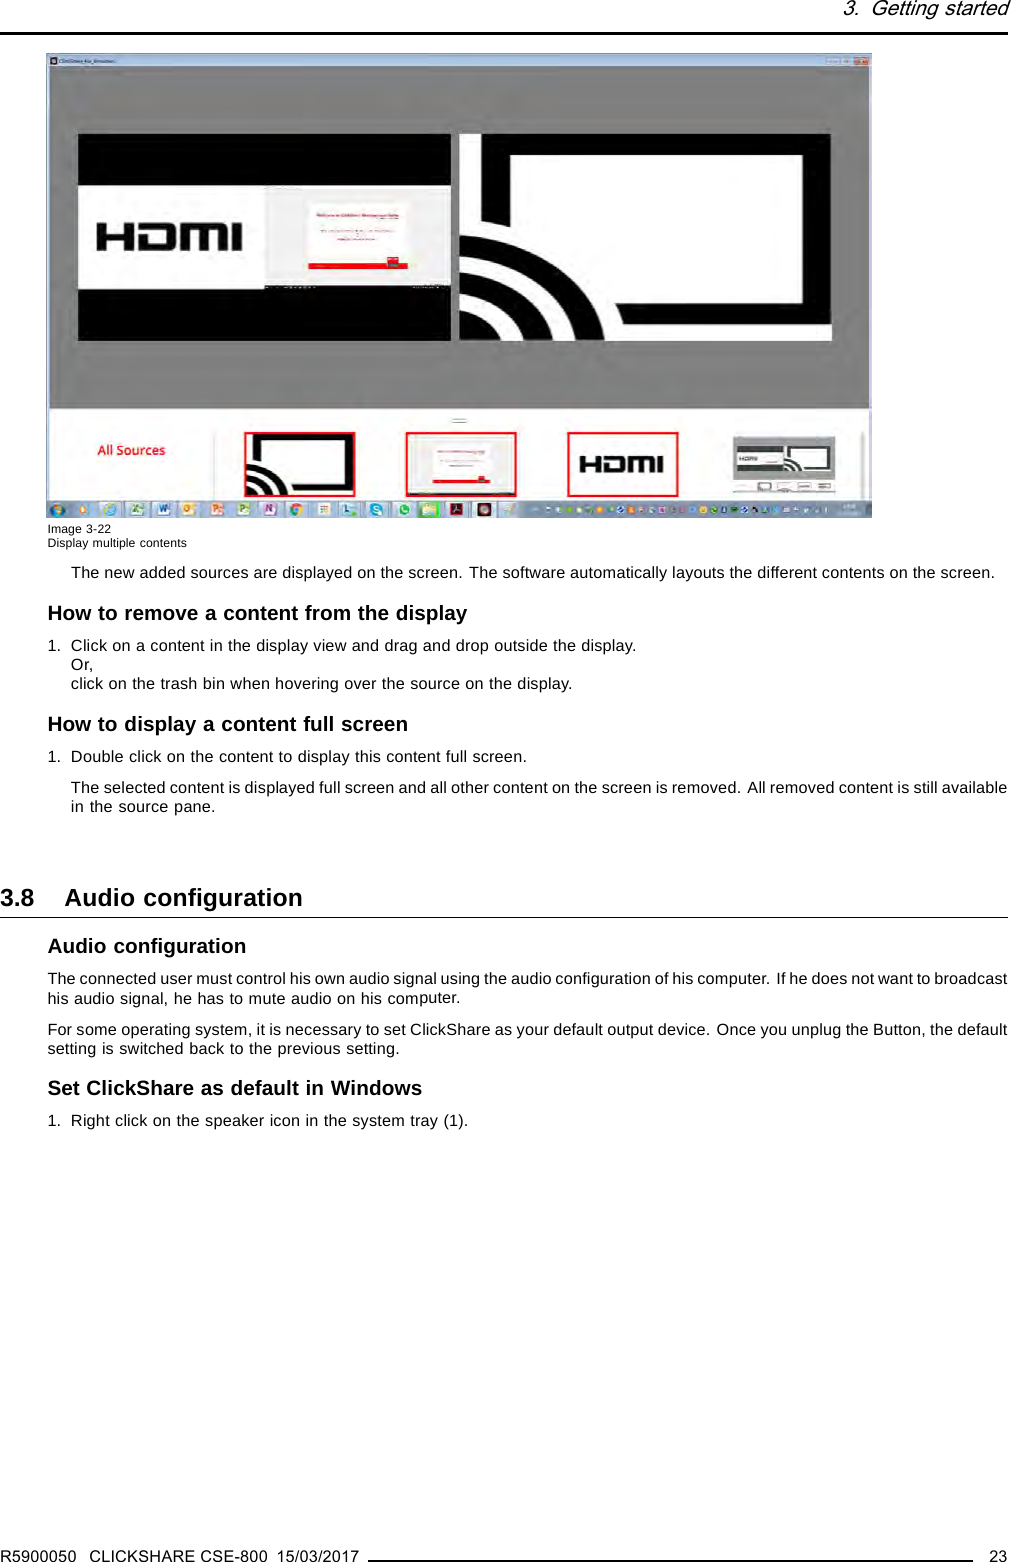 3. Getting startedImage 3-22Display multiple contentsThe new added sources are displayed on the screen. The software automatically layouts the different contents on the screen.How to remove a content from the display1. Click on a content in the display view and drag and drop outside the display.Or,click on the trash bin when hovering over the source on the display.How to display a content full screen1. Double click on the content to display this content full screen.The selected content is displayed full screen and all other content on the screen is removed. All removed content is still availablein the source pane.3.8 Audio conﬁgurationAudio conﬁgurationThe connected user must control his own audio signal using the audio conﬁguration of his computer. If he does not want to broadcasthis audio signal, he has to mute audio on his computer.For some operating system, it is necessary to set ClickShare as your default output device. Once you unplug the Button, the defaultsetting is switched back to the previous setting.Set ClickShare as default in Windows1. Right click on the speaker icon in the system tray (1).R5900050 CLICKSHARE CSE-800 15/03/2017 23